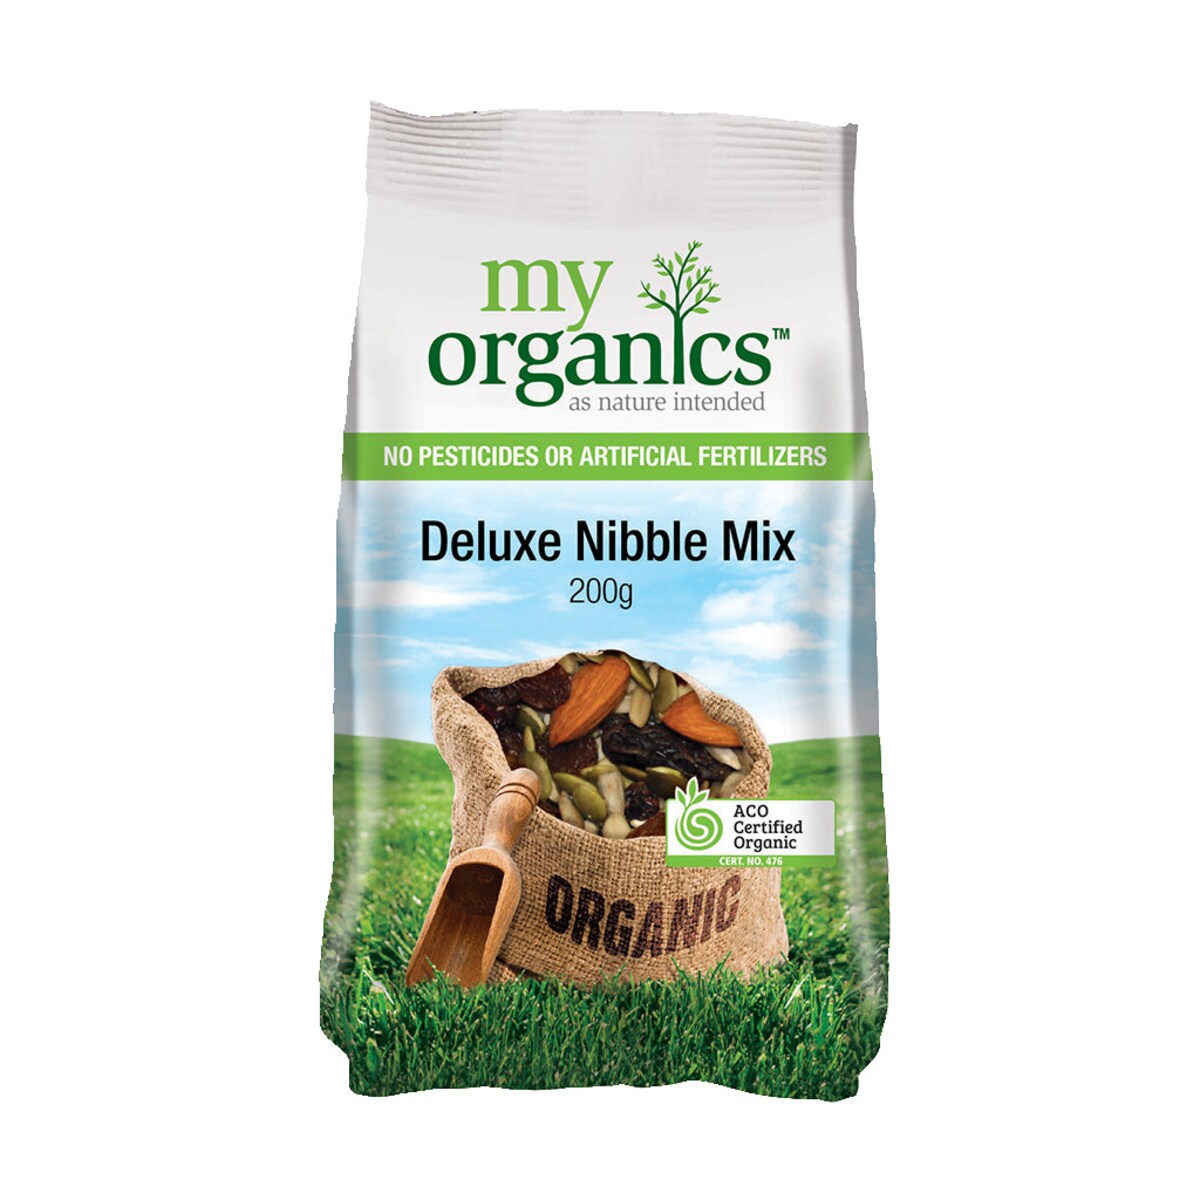 My Organics Deluxe Nibble Mix 200g